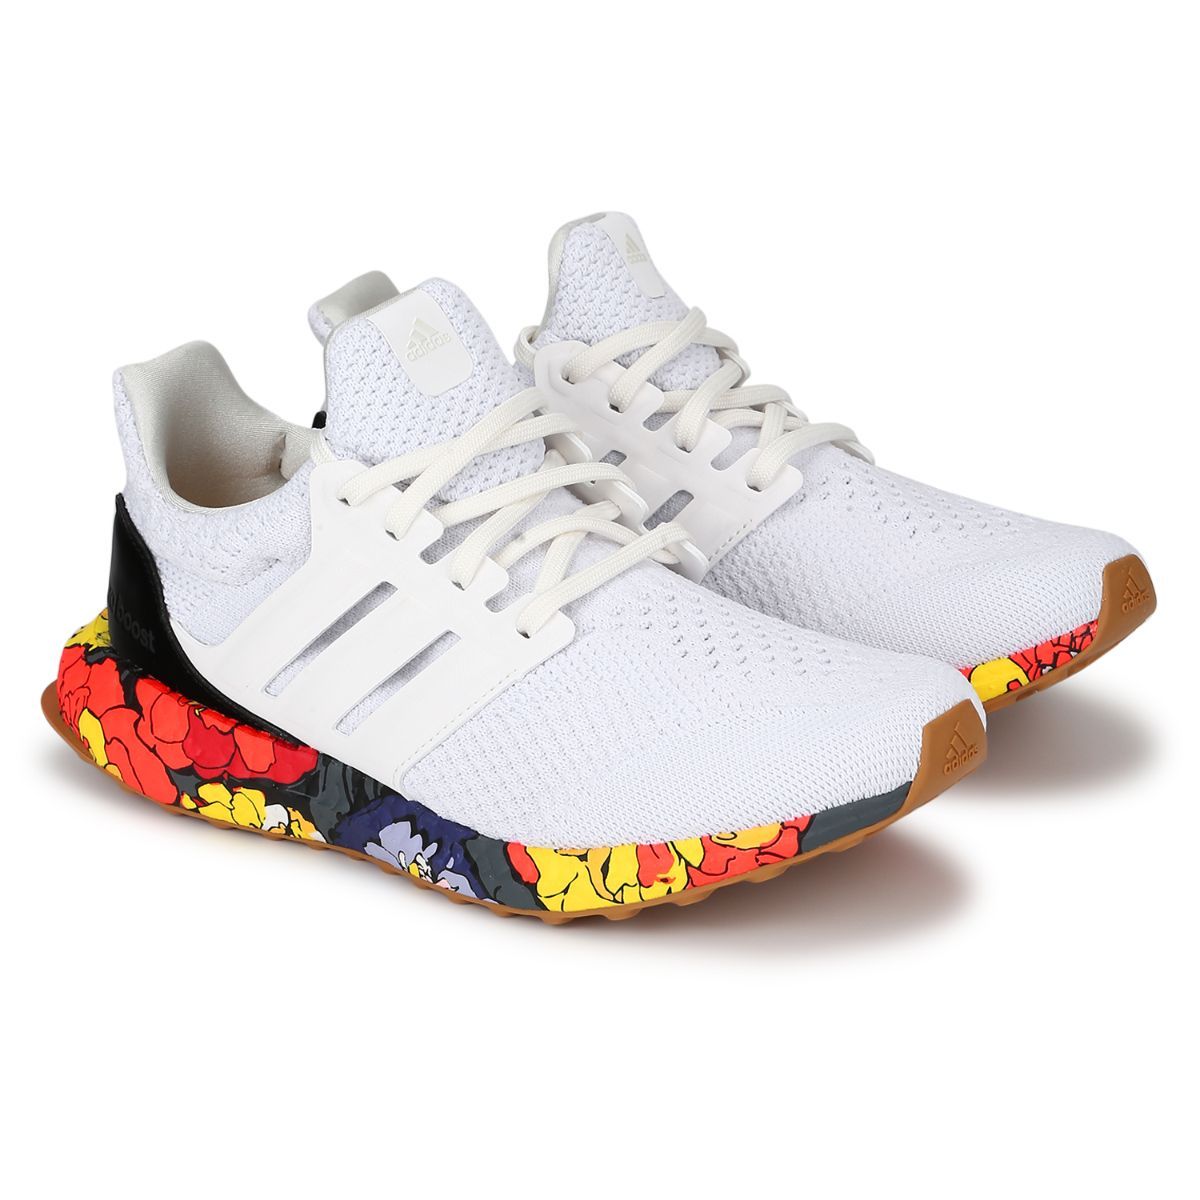 adidas Ultraboost 5.0 Dna White Running Shoes 6): Buy adidas Ultraboost 5.0 W White Running Shoes (UK 6) Online at Best Price in India Nykaa